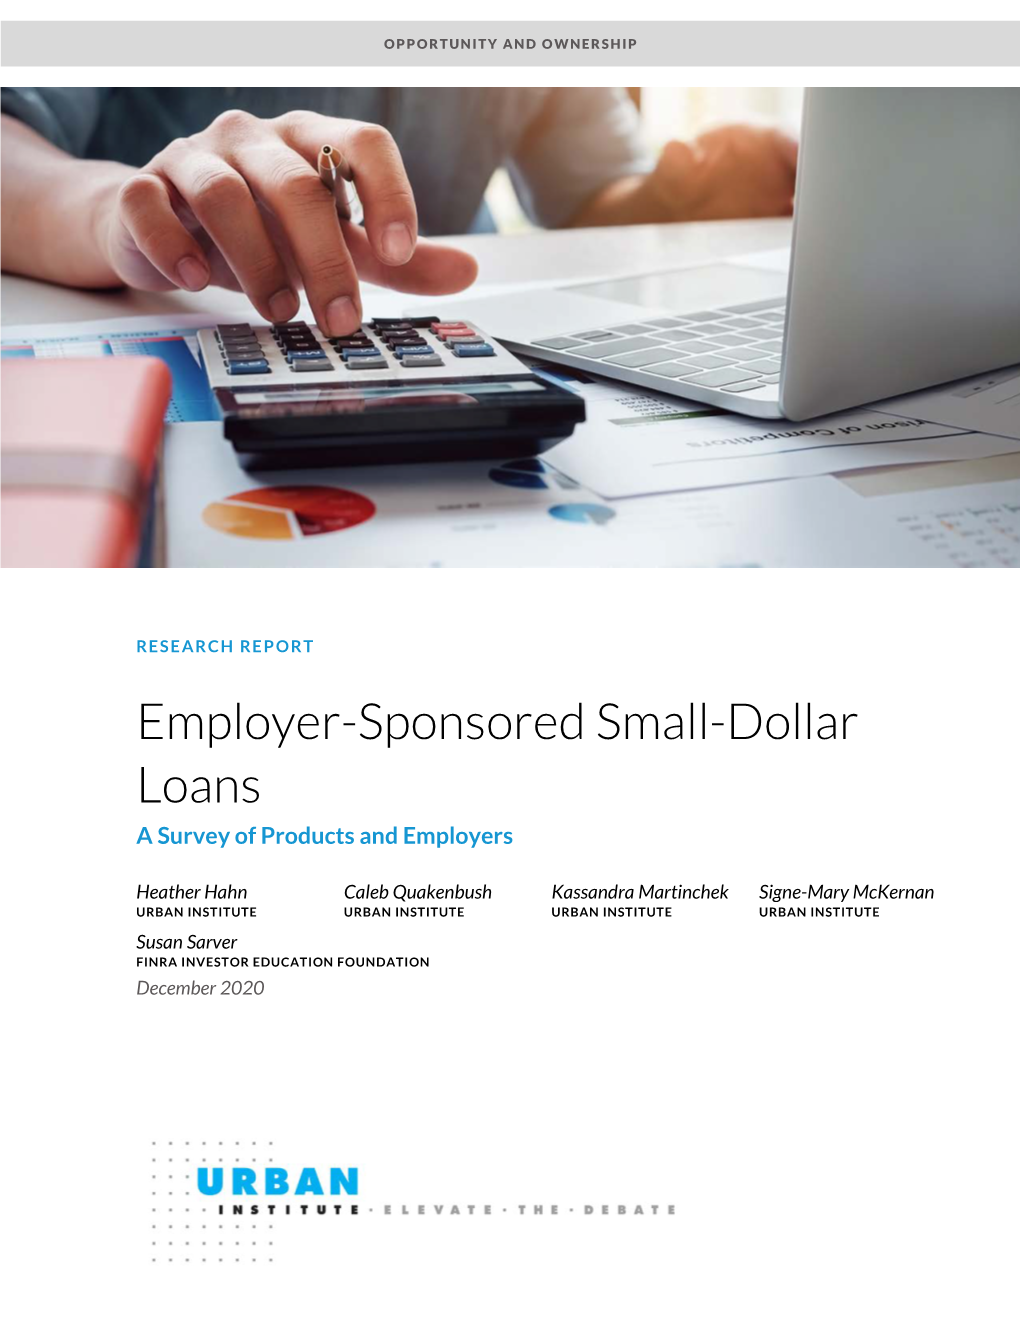 Employer-Sponsored Small-Dollar Loans a Survey of Products and Employers